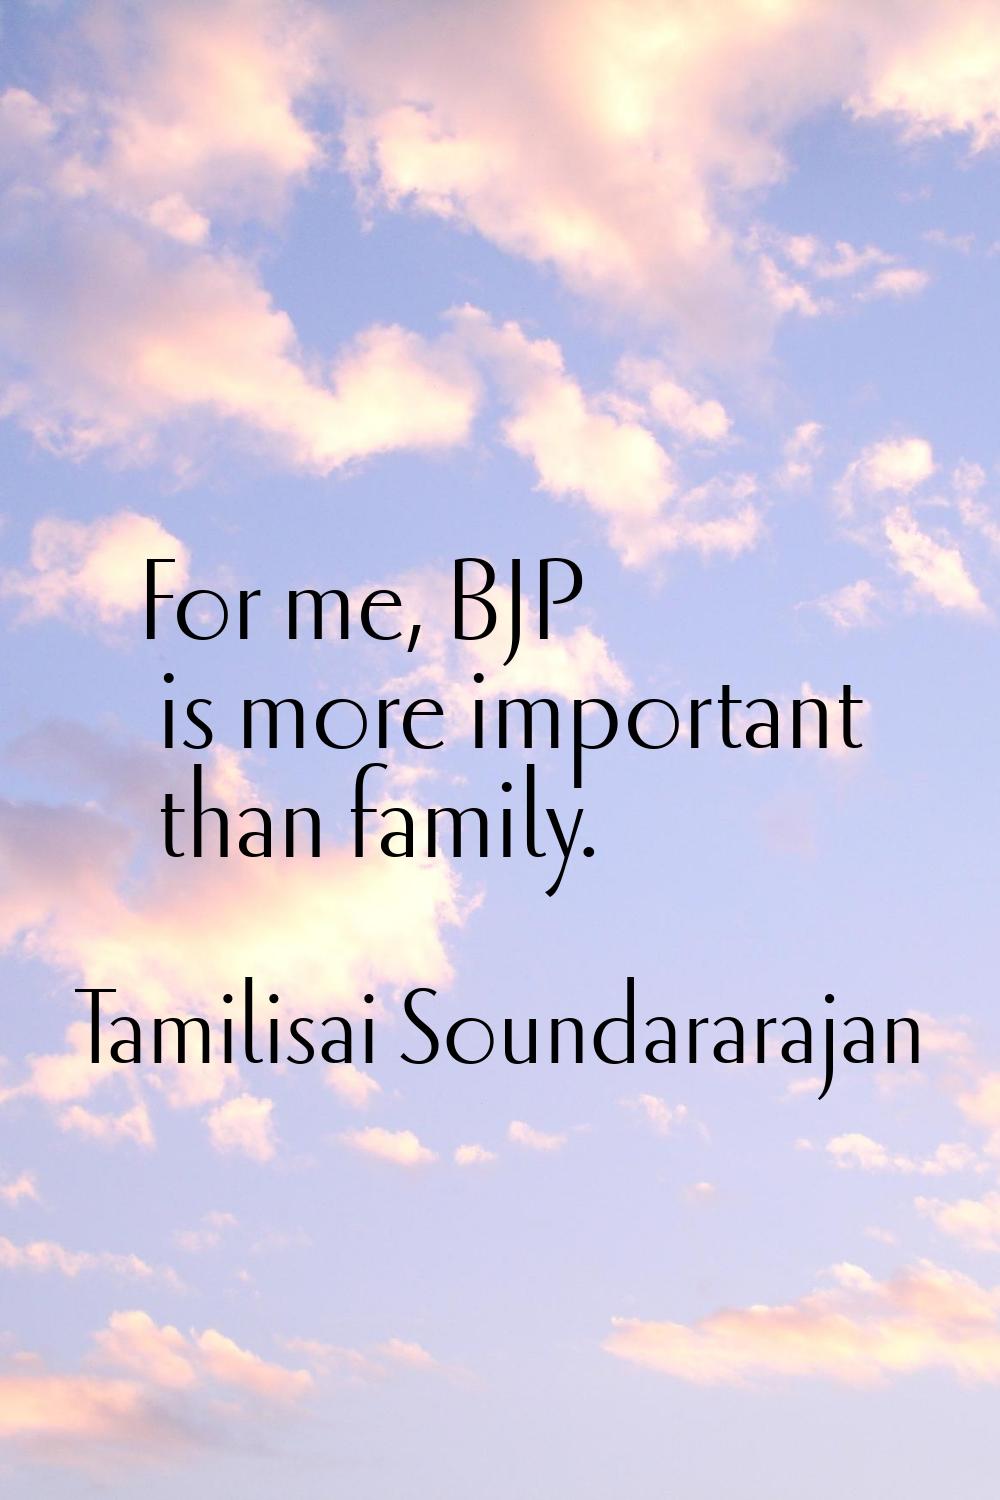 For me, BJP is more important than family.